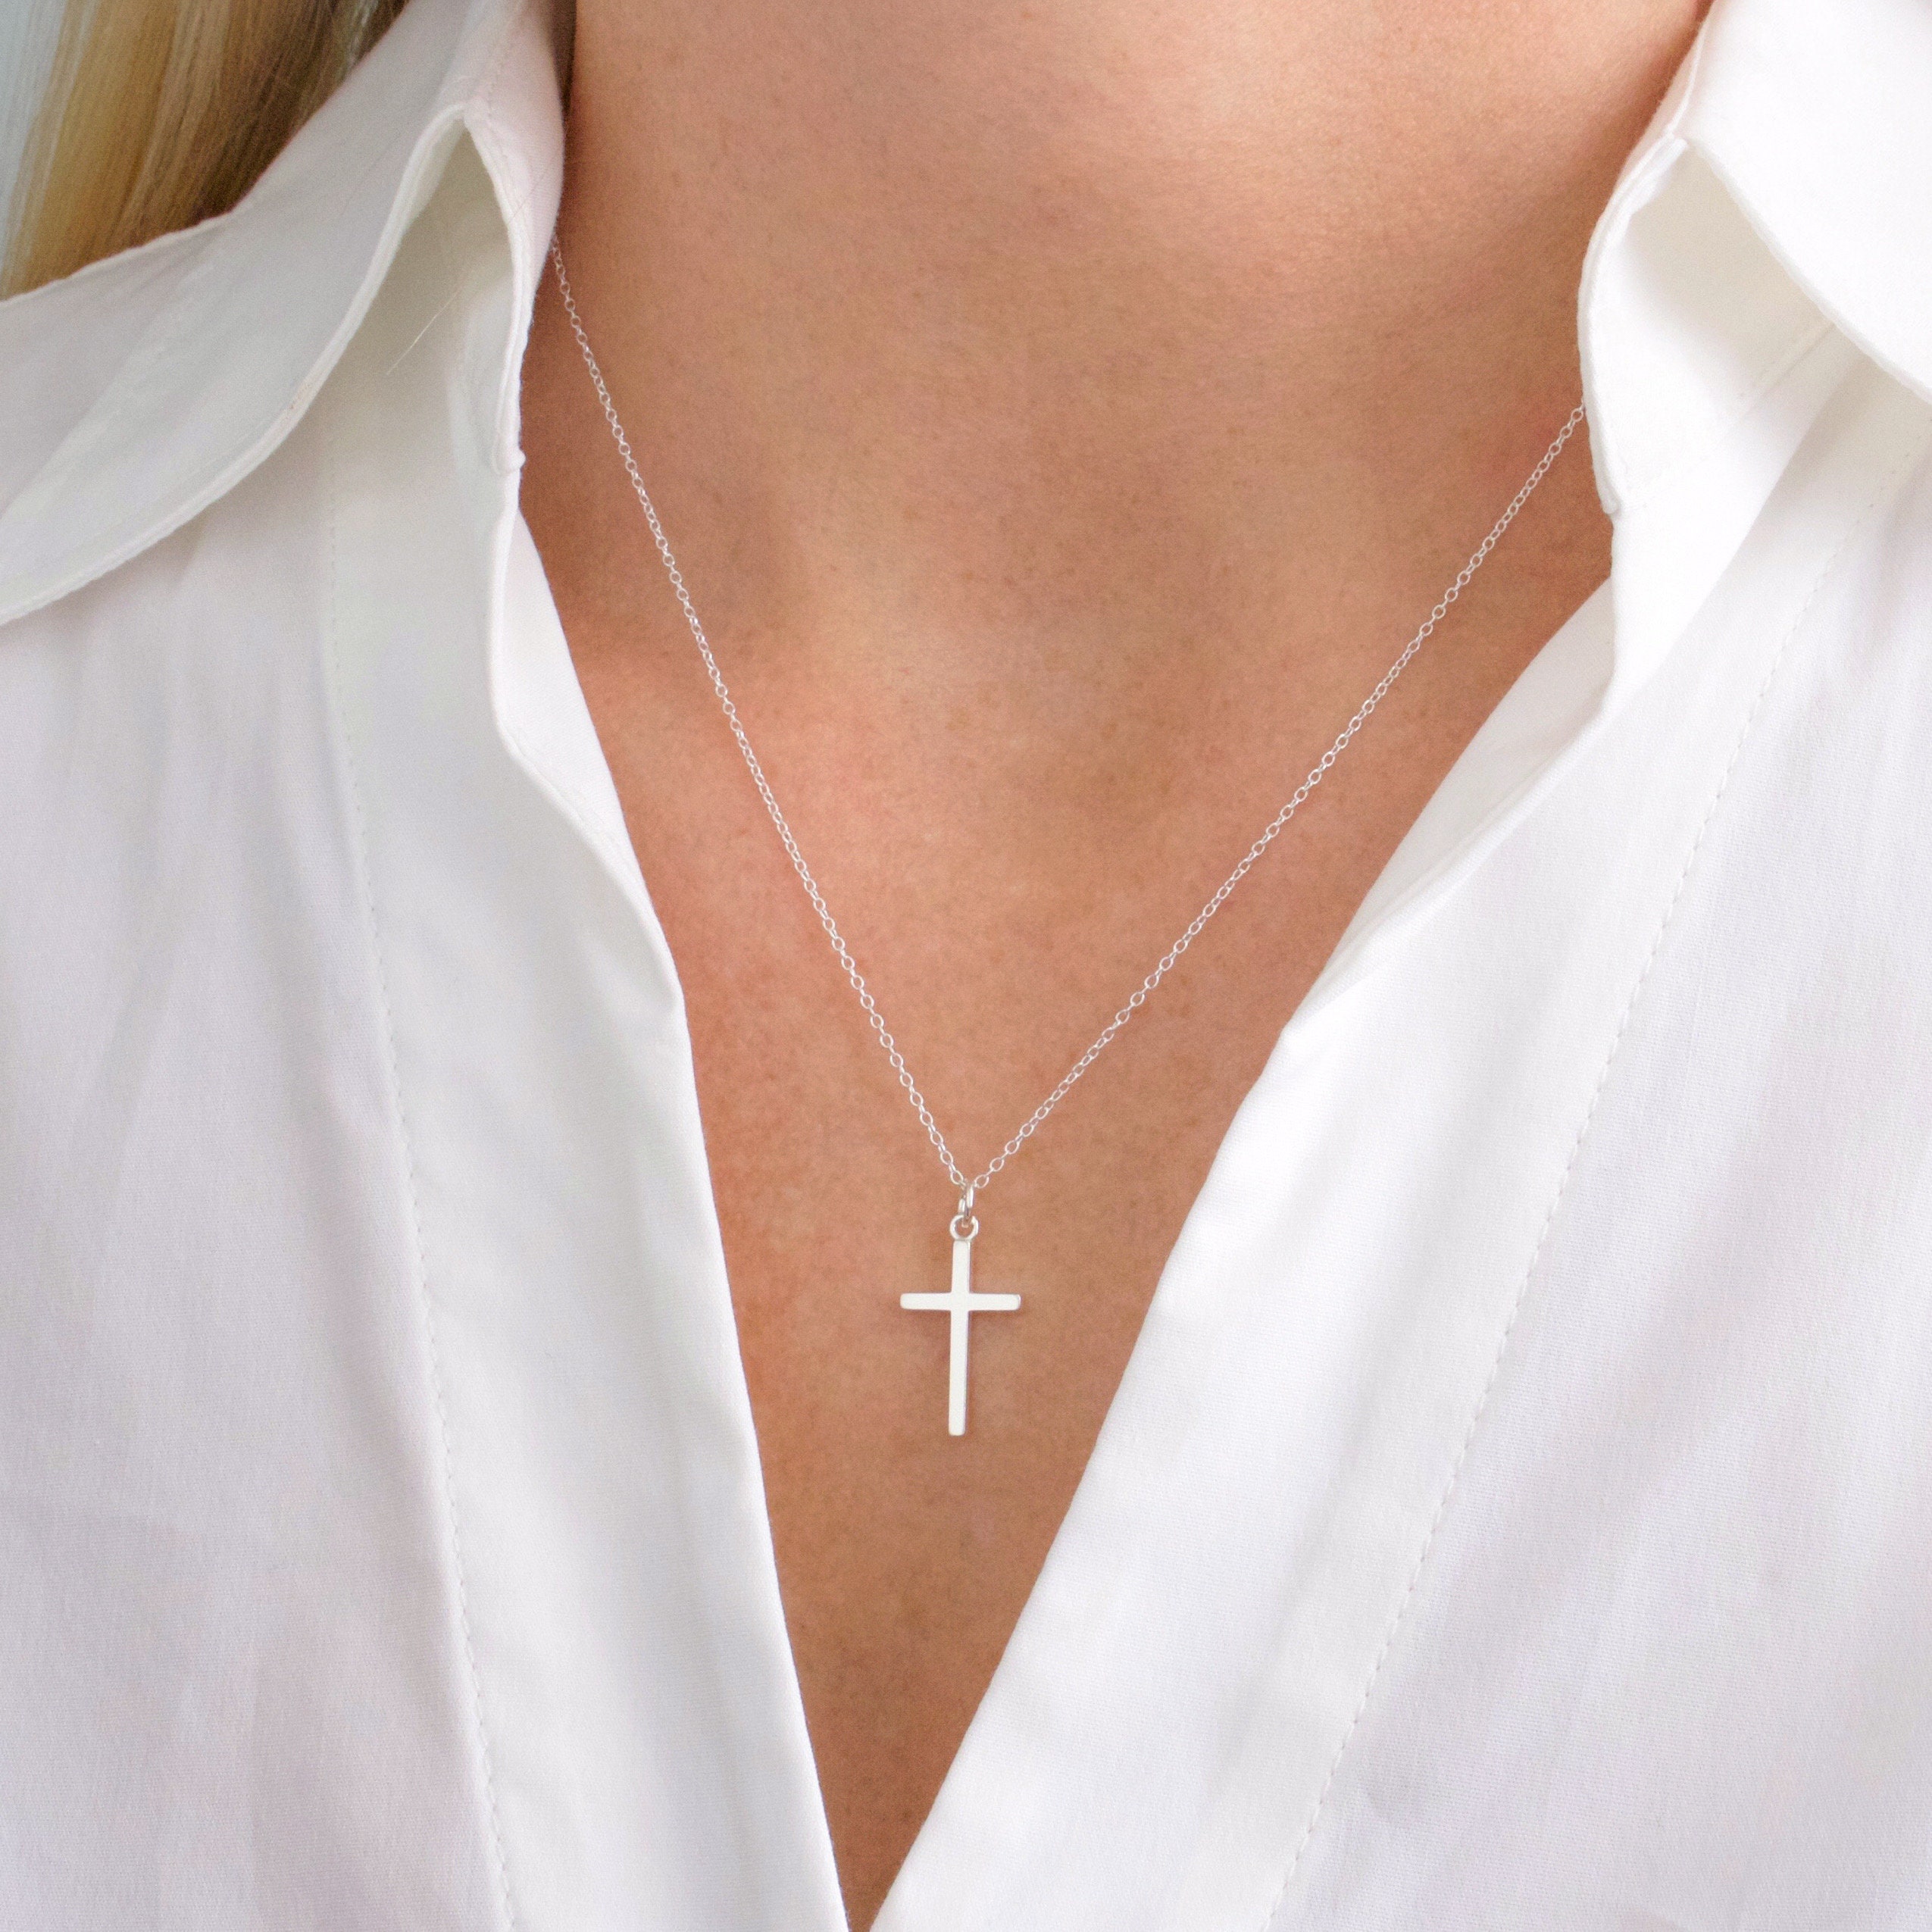 Sterling Silver Cross Necklace, Religious Jewelry Gift, Womens Christian  Faith Medium Cross Pendant, Christmas Cross Gift, FREE SHIPPING - Etsy